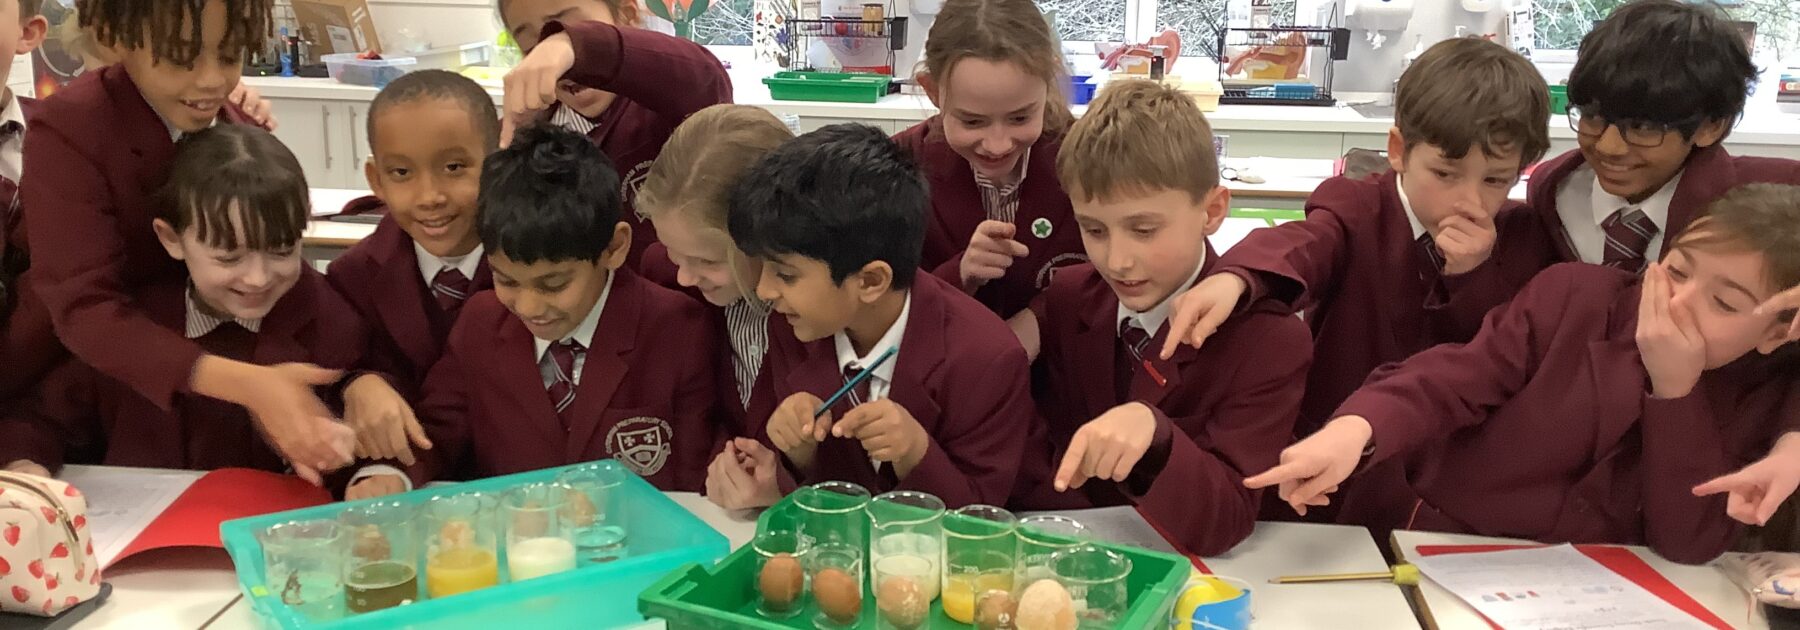 Year 4 Egg-citing Tooth Experiment Produces Shocking Results